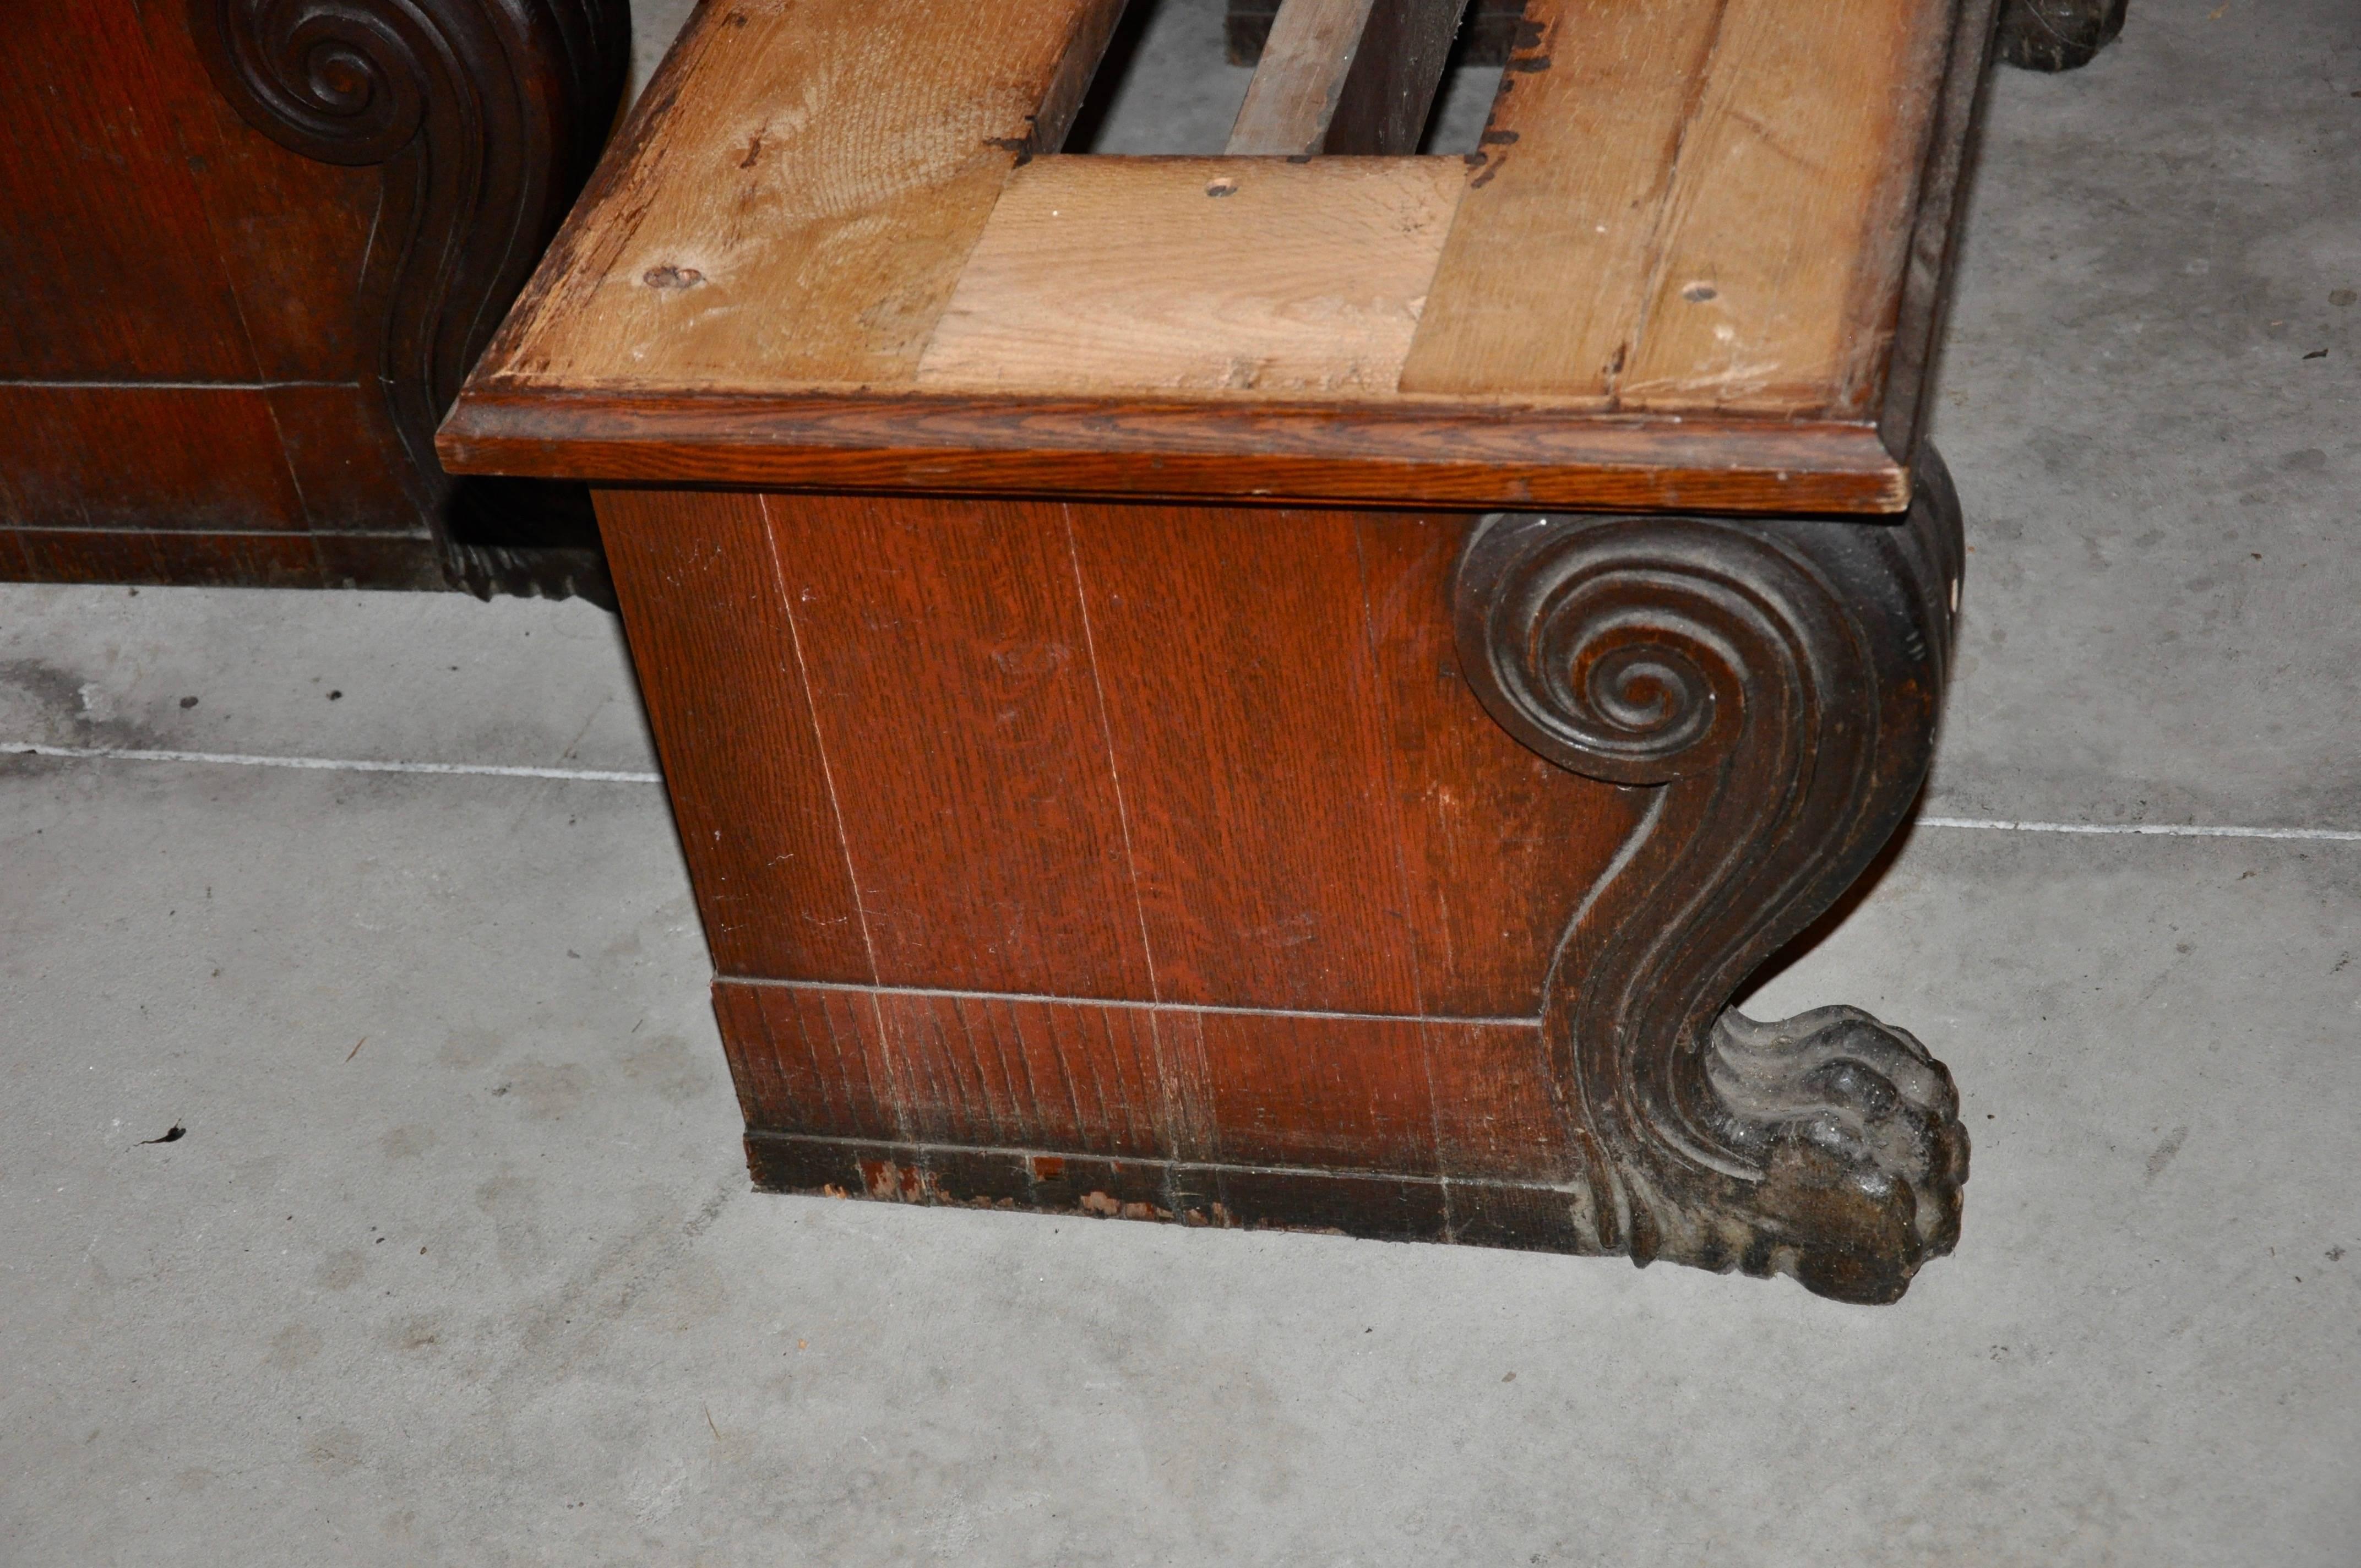 Pair of 19th Century Carved Oak Renaissance Revival Benches deigned and installed in the Bates Room of the Boston Public Library by Charles Follen McKim of the architectural firm, 